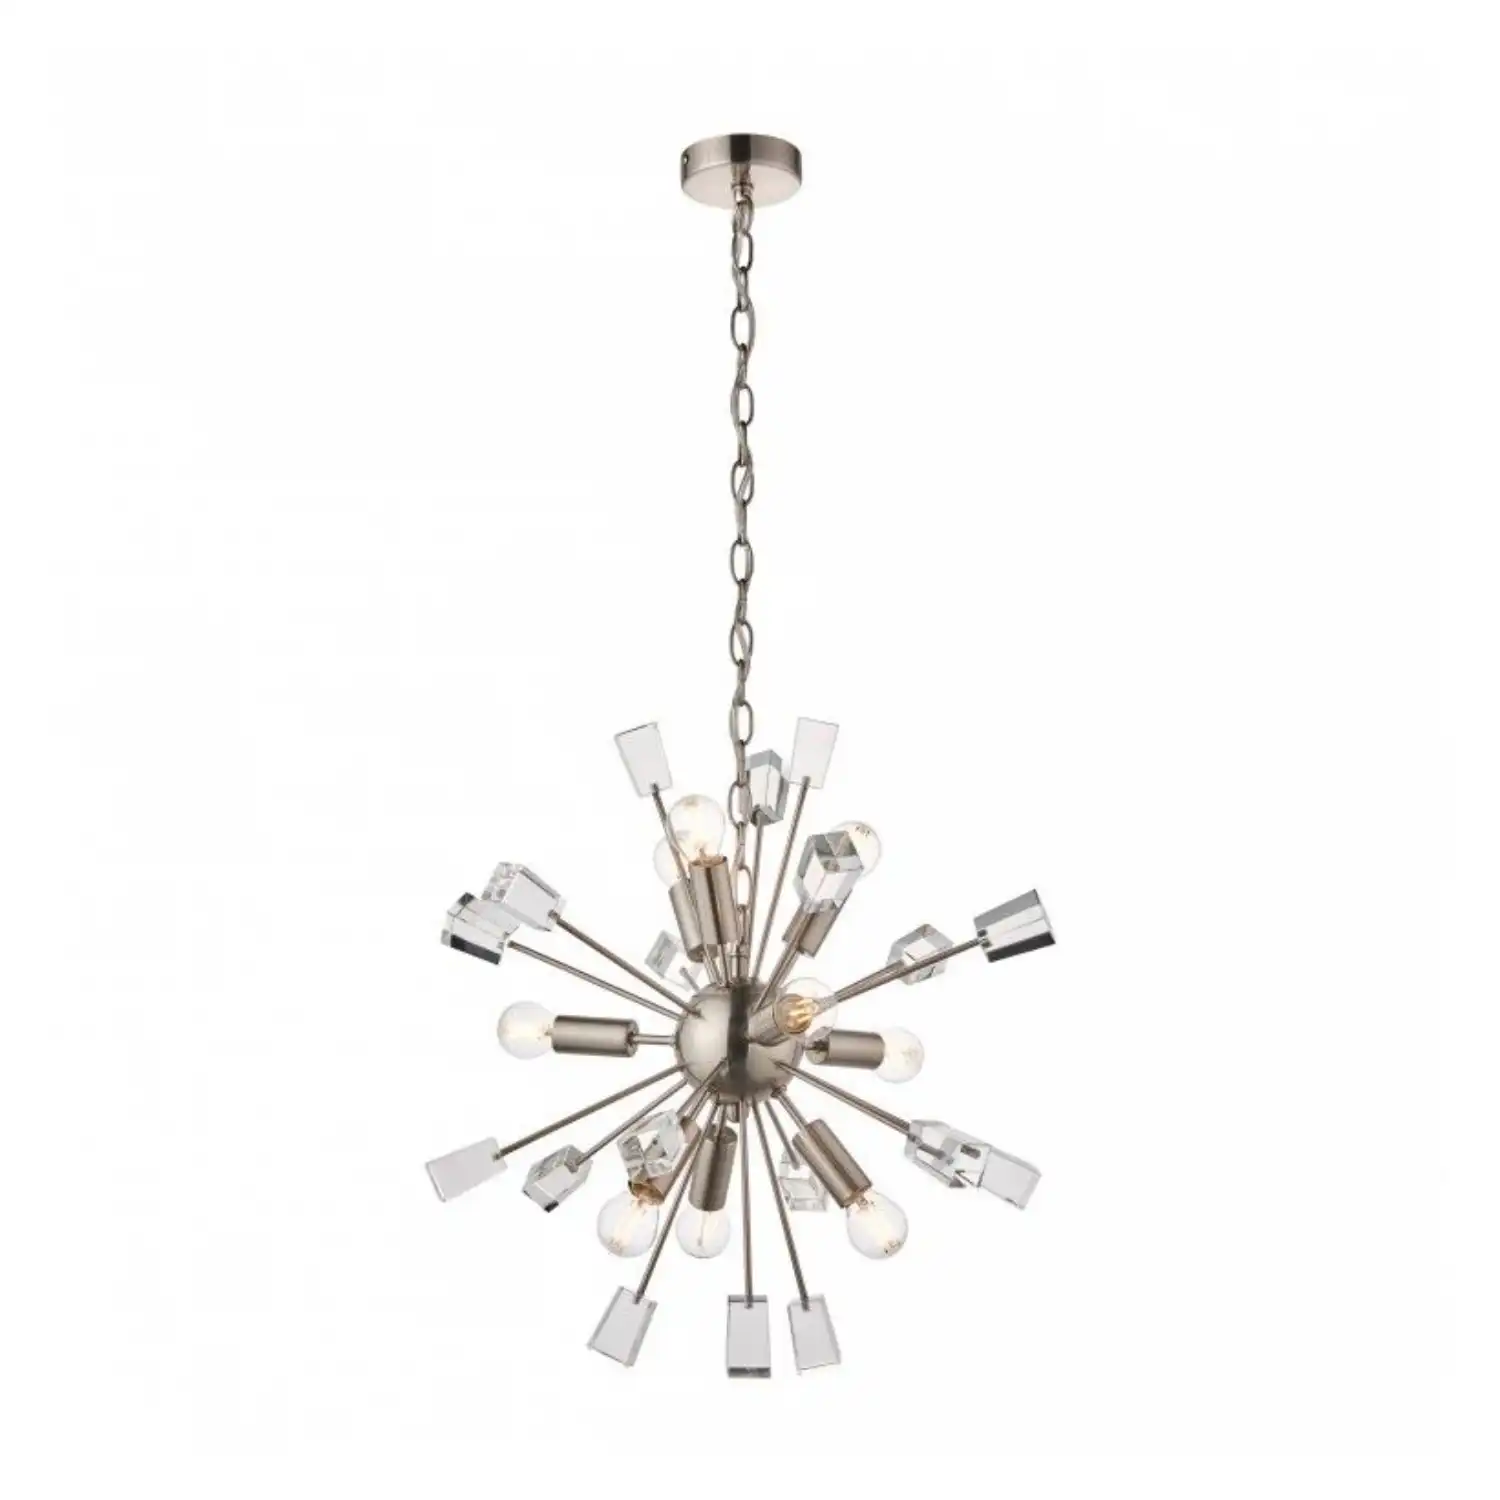 9 Pendant Ceiling Wall Lighting Silver Nickel On Chain